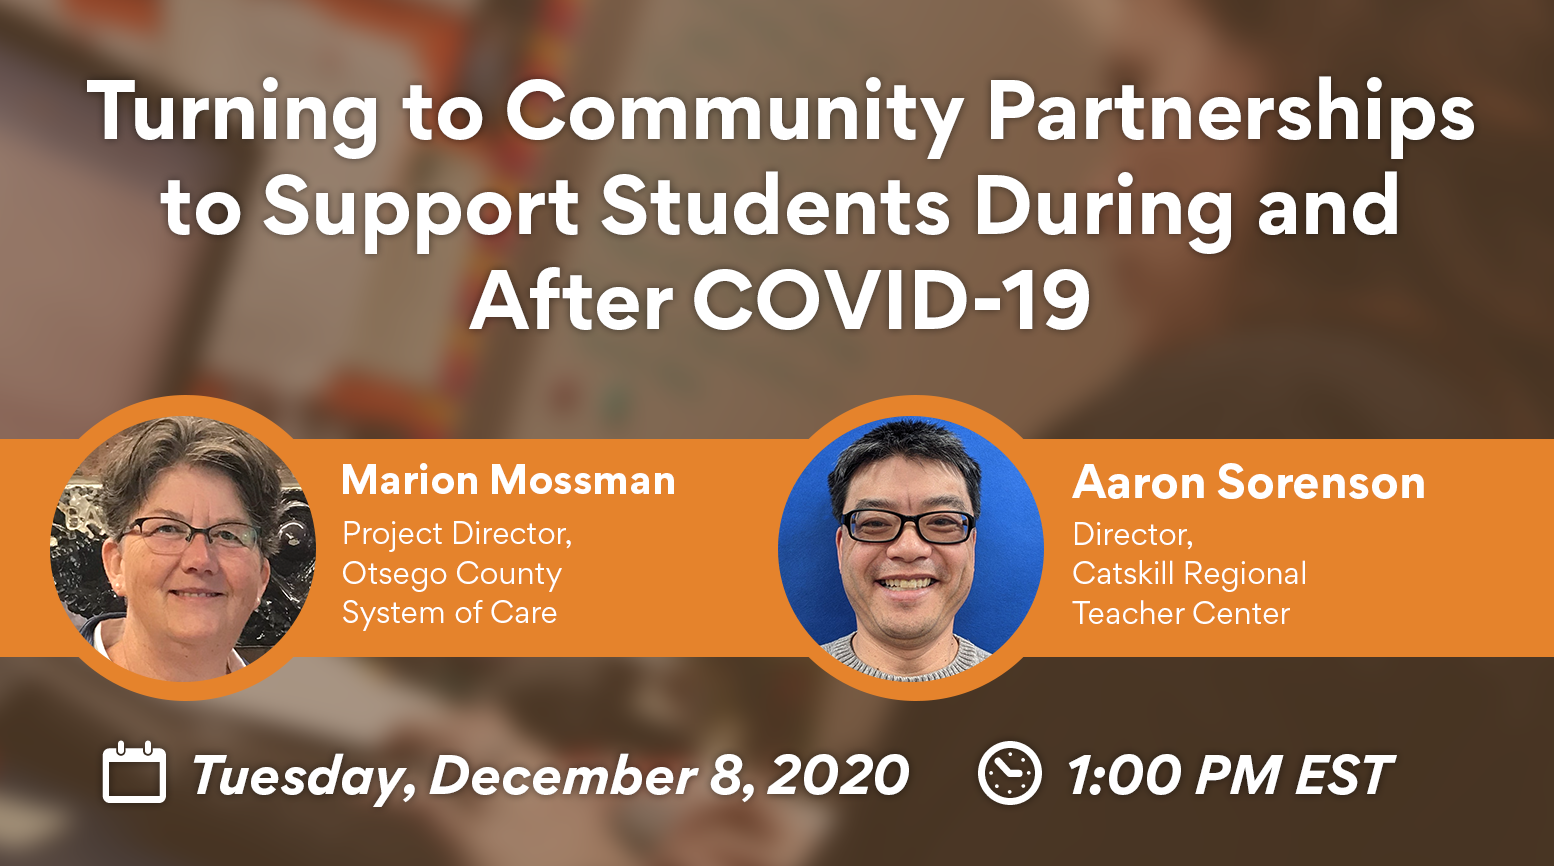 Turning to Community Partnerships to Support Students During and After COVID-19